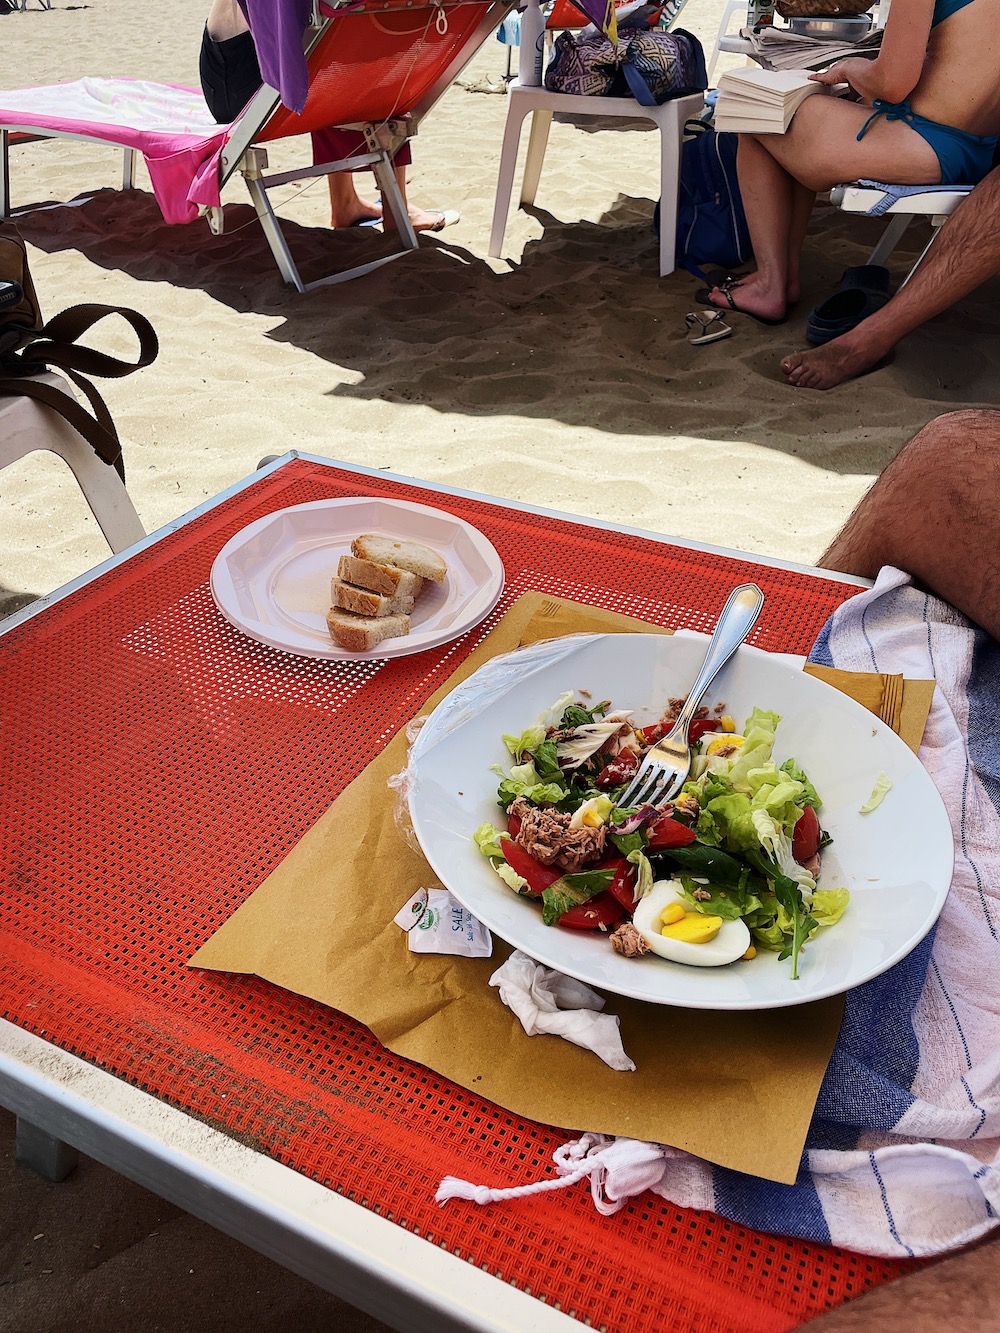 life in Rome: lunch at the beach